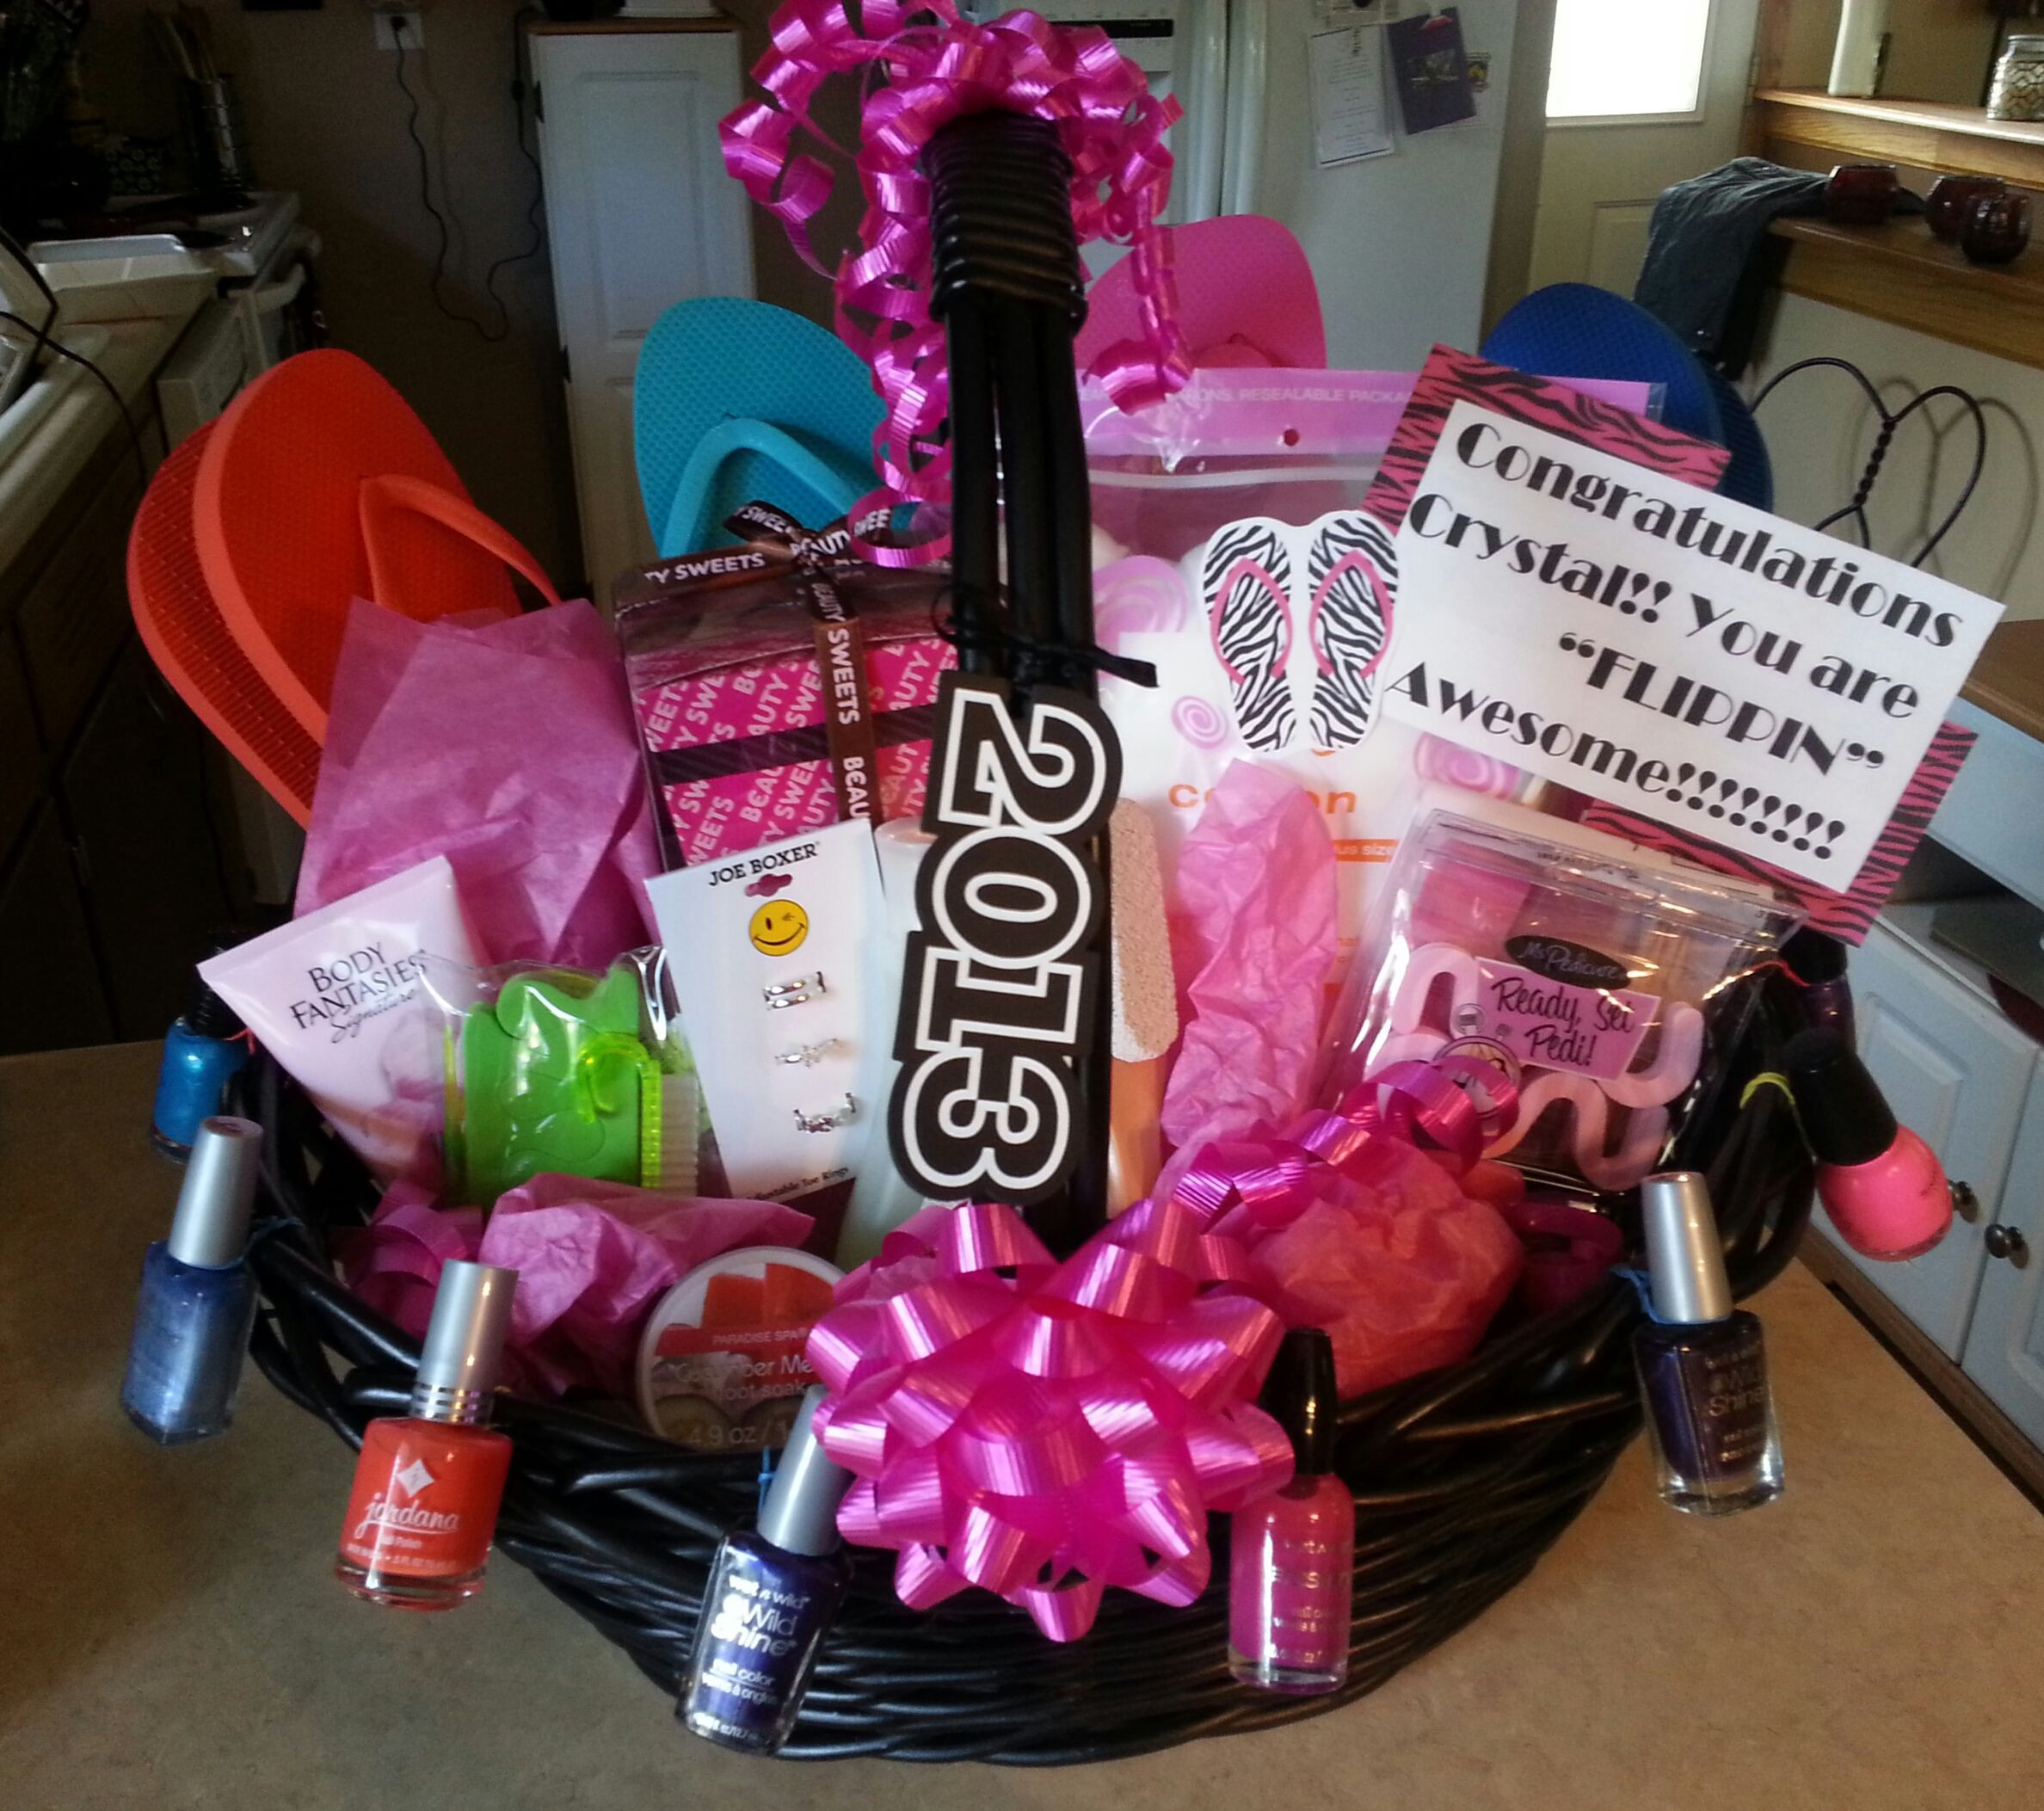 Girls Graduation Gift Ideas
 Great Graduation Gift for a girl Made this one for my